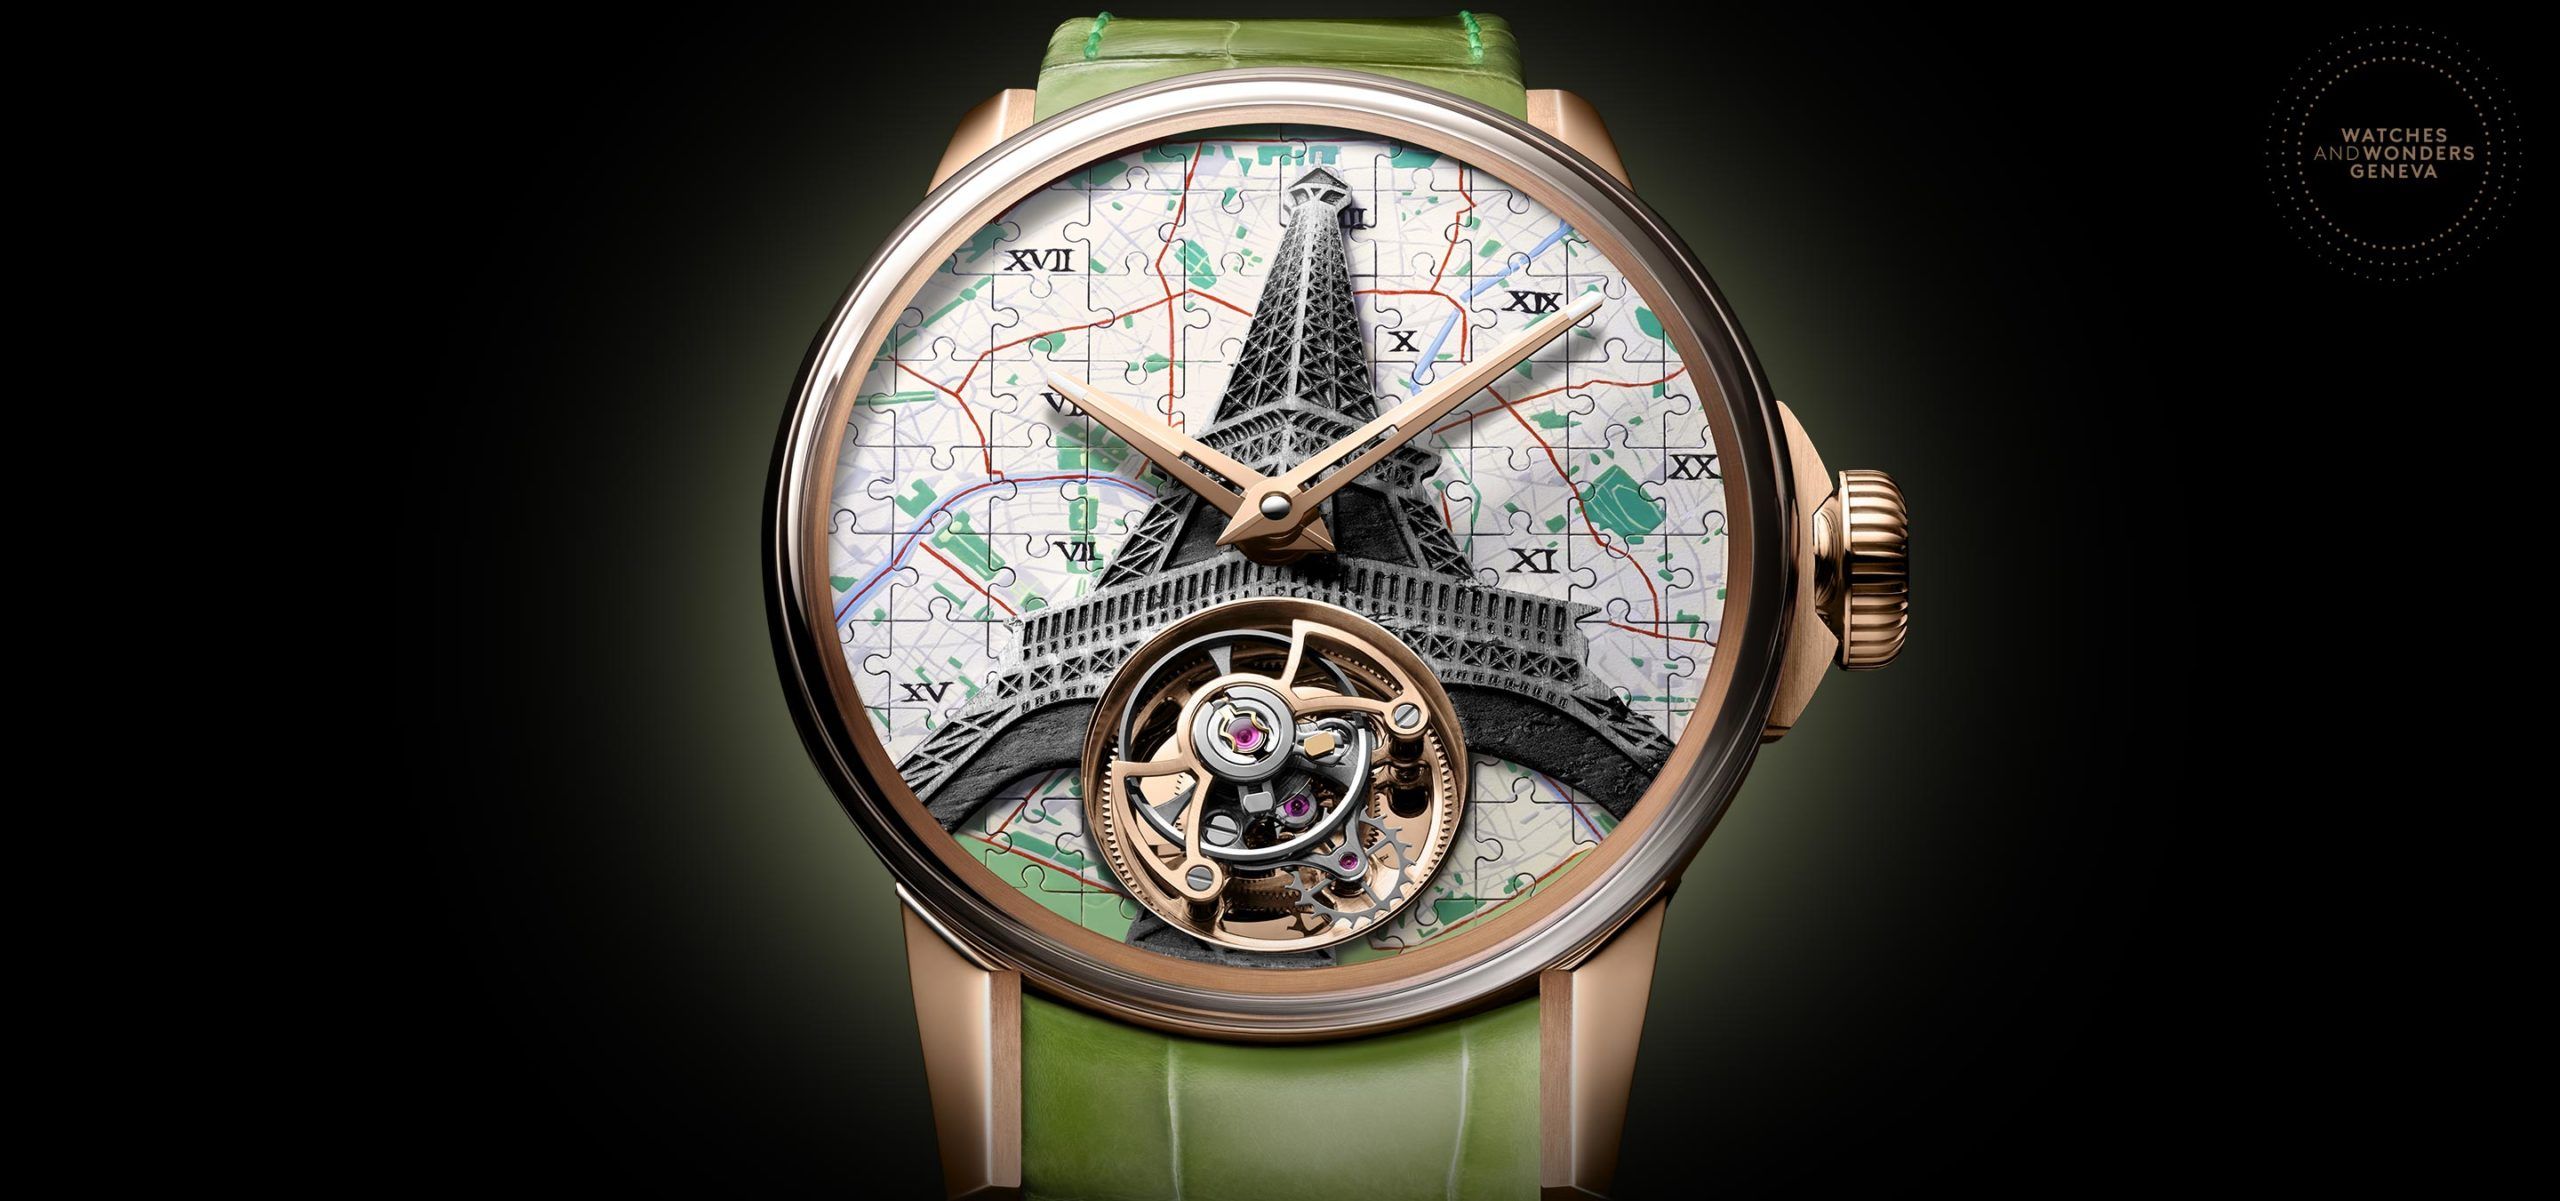 From Paris to New York, Louis Moinet Around The World In Eight Days Adventure Unfolds